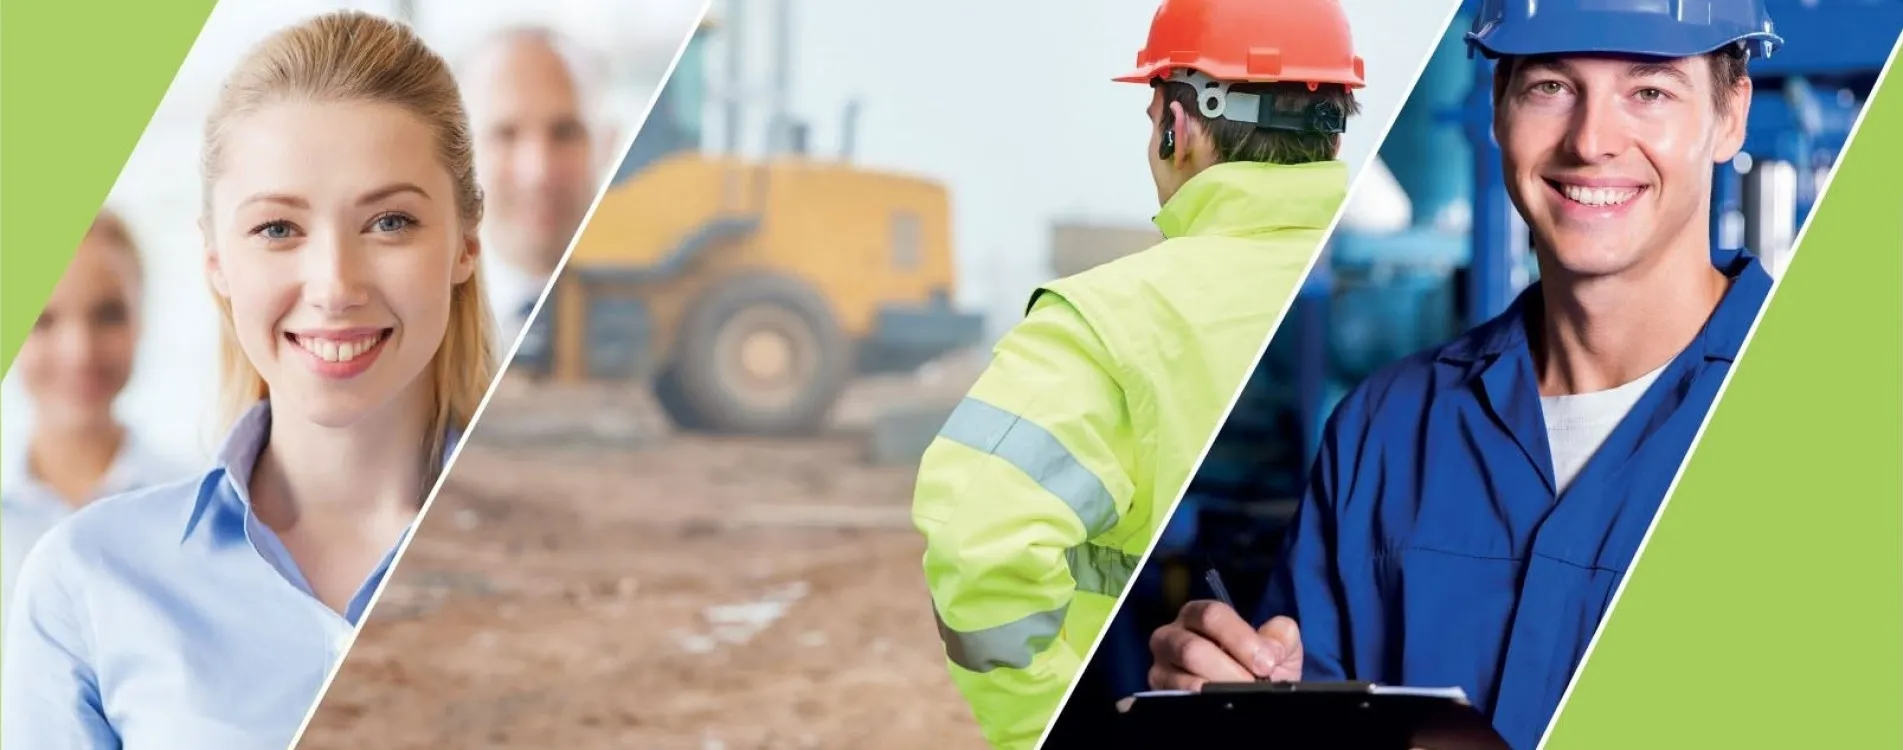 Health & Safety Consultancy Services in London